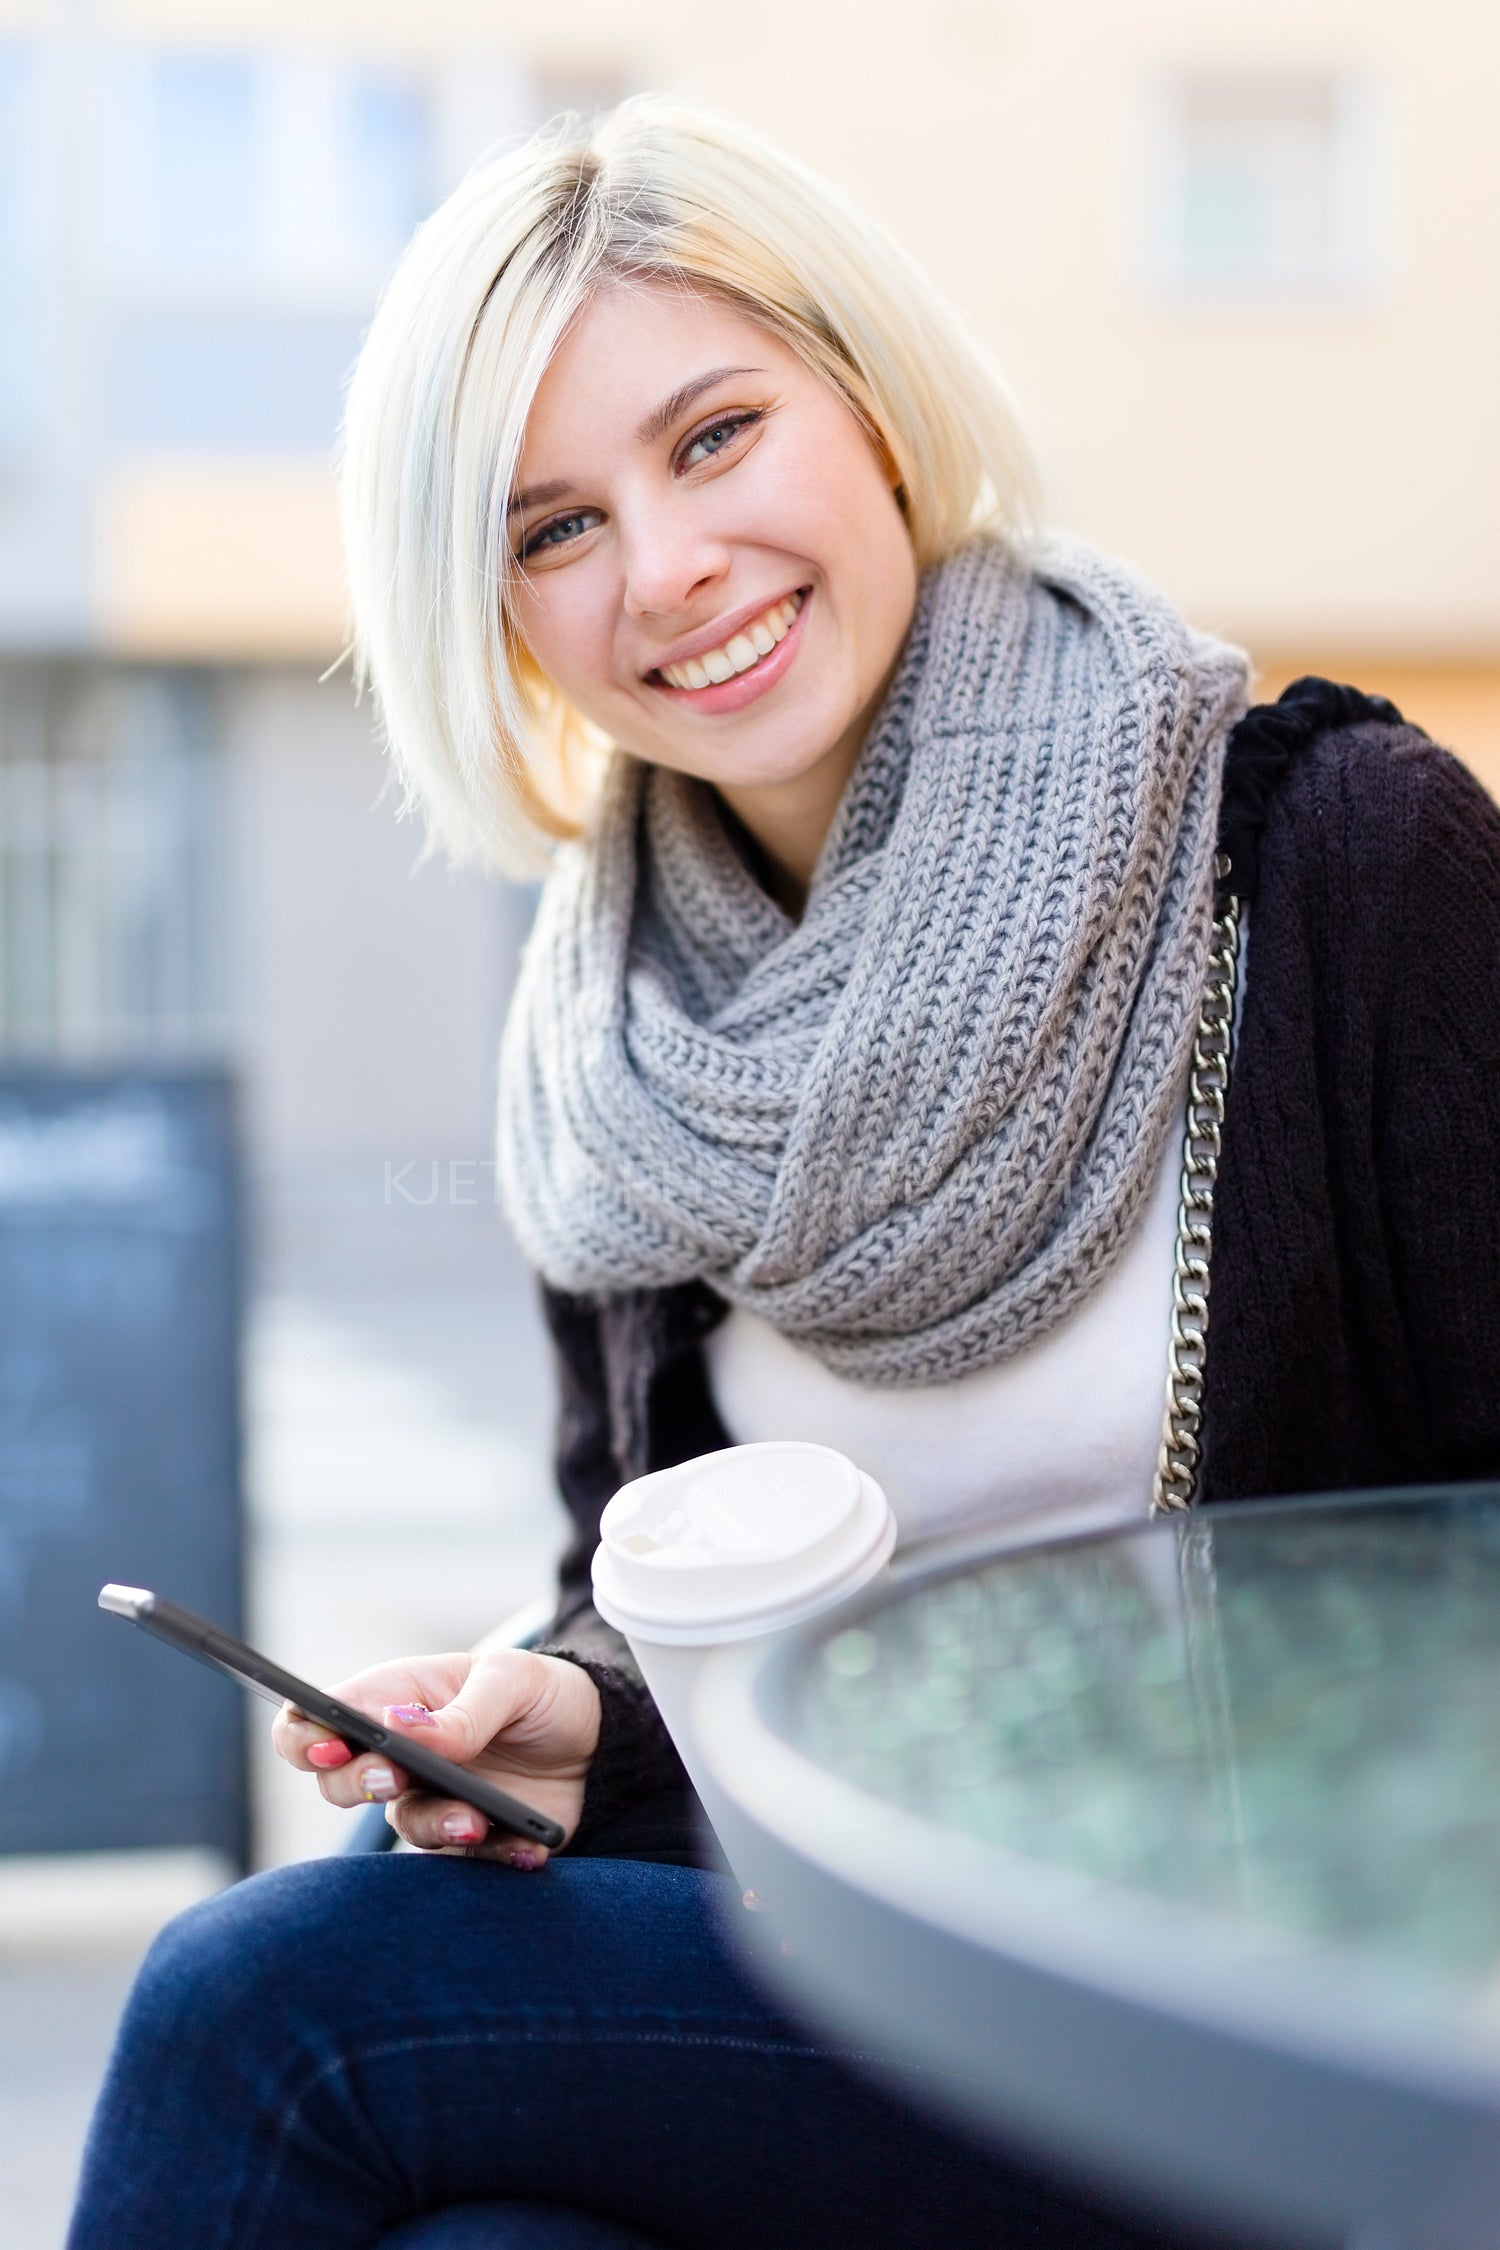 Smiling woman with coffee and using phone outdoor